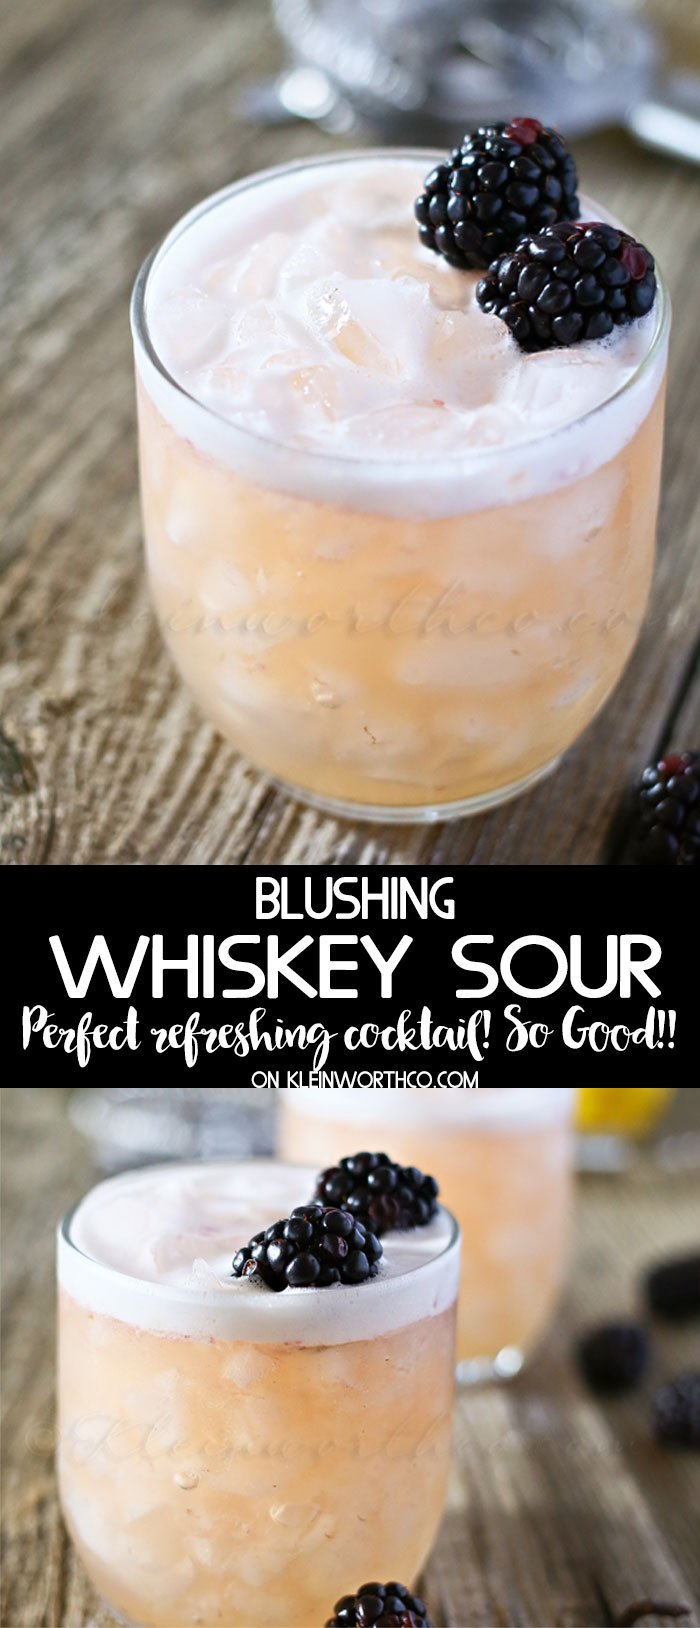 Blushing Whiskey Sour Kleinworth Co,What Is Msg For Cooking